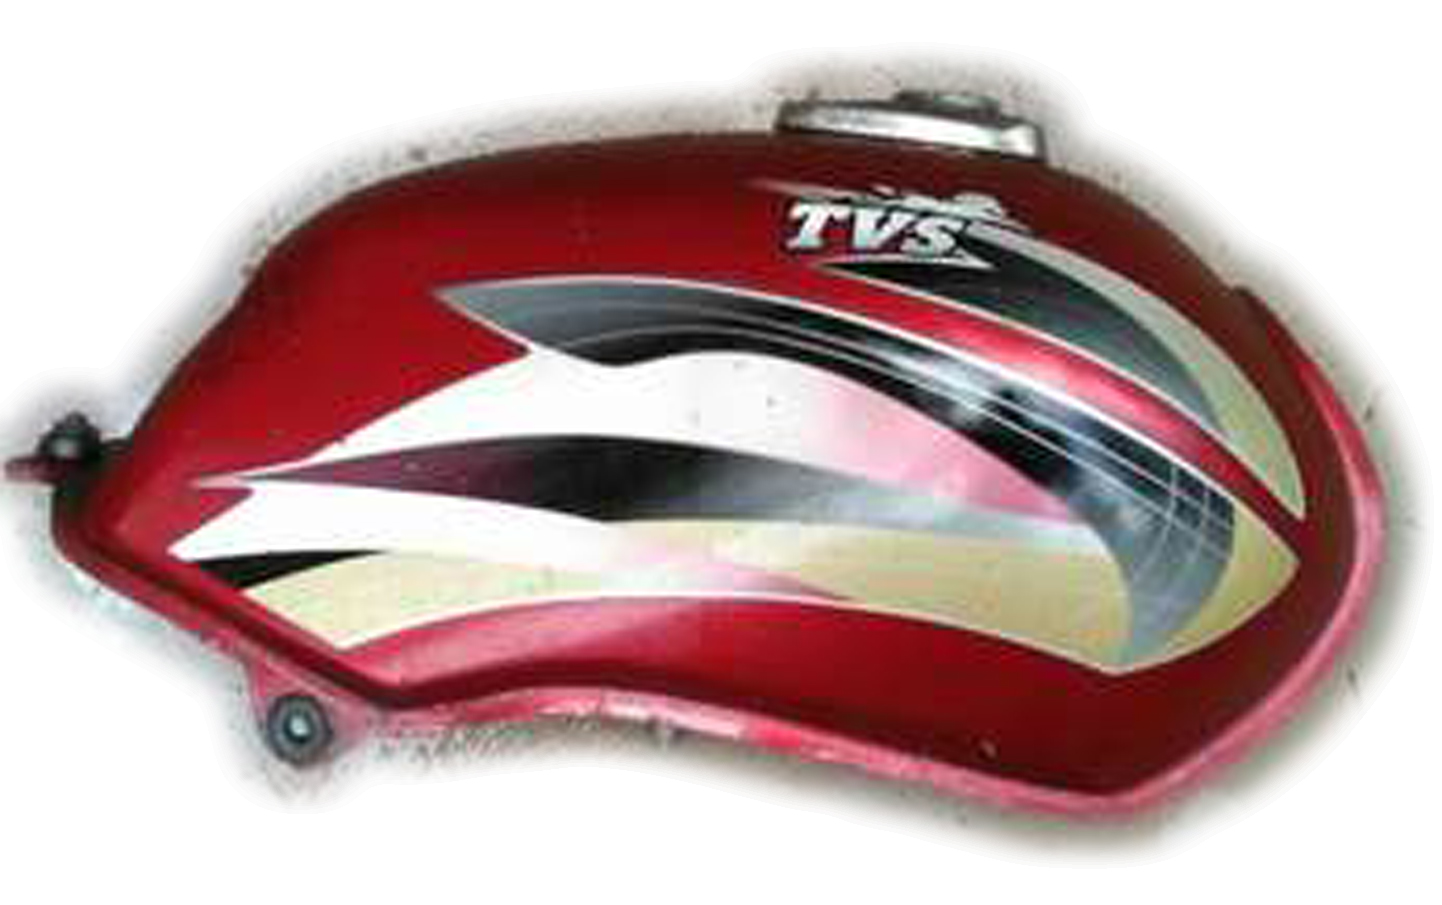 tvs star city old model spare parts